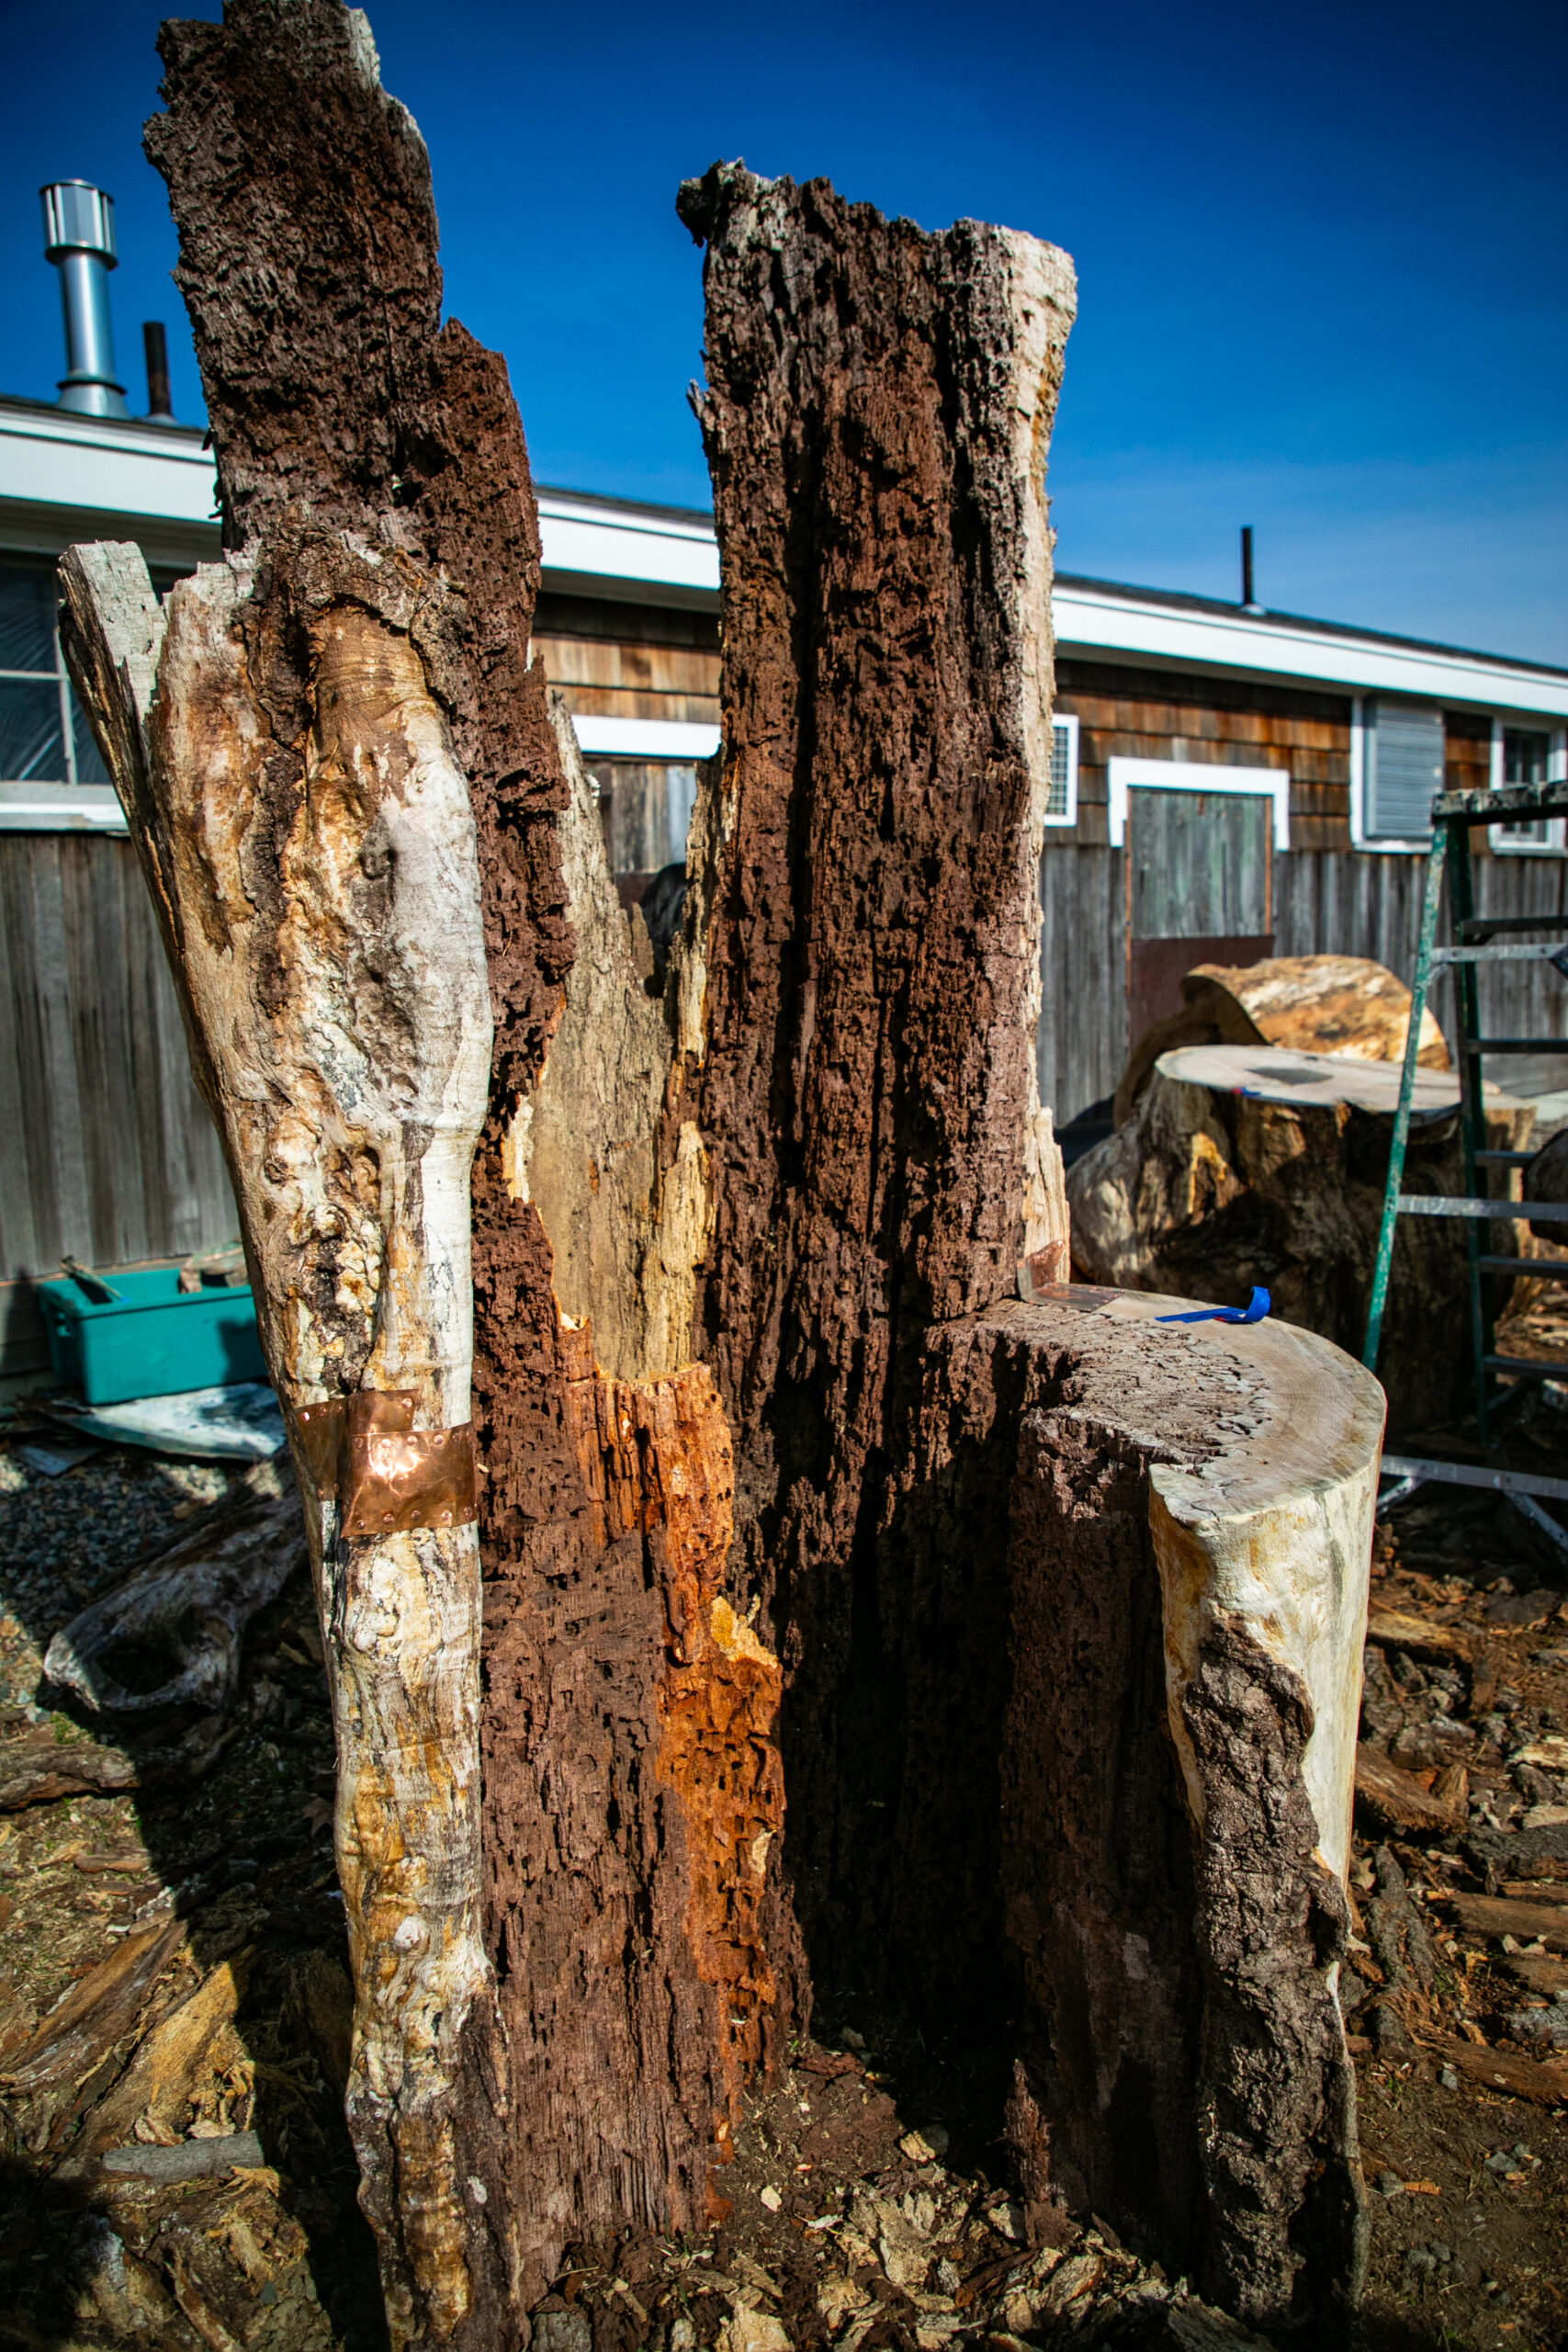 A tall, eroded stump that will be used in Jean Shin's Perch installation at Appleton Farms.